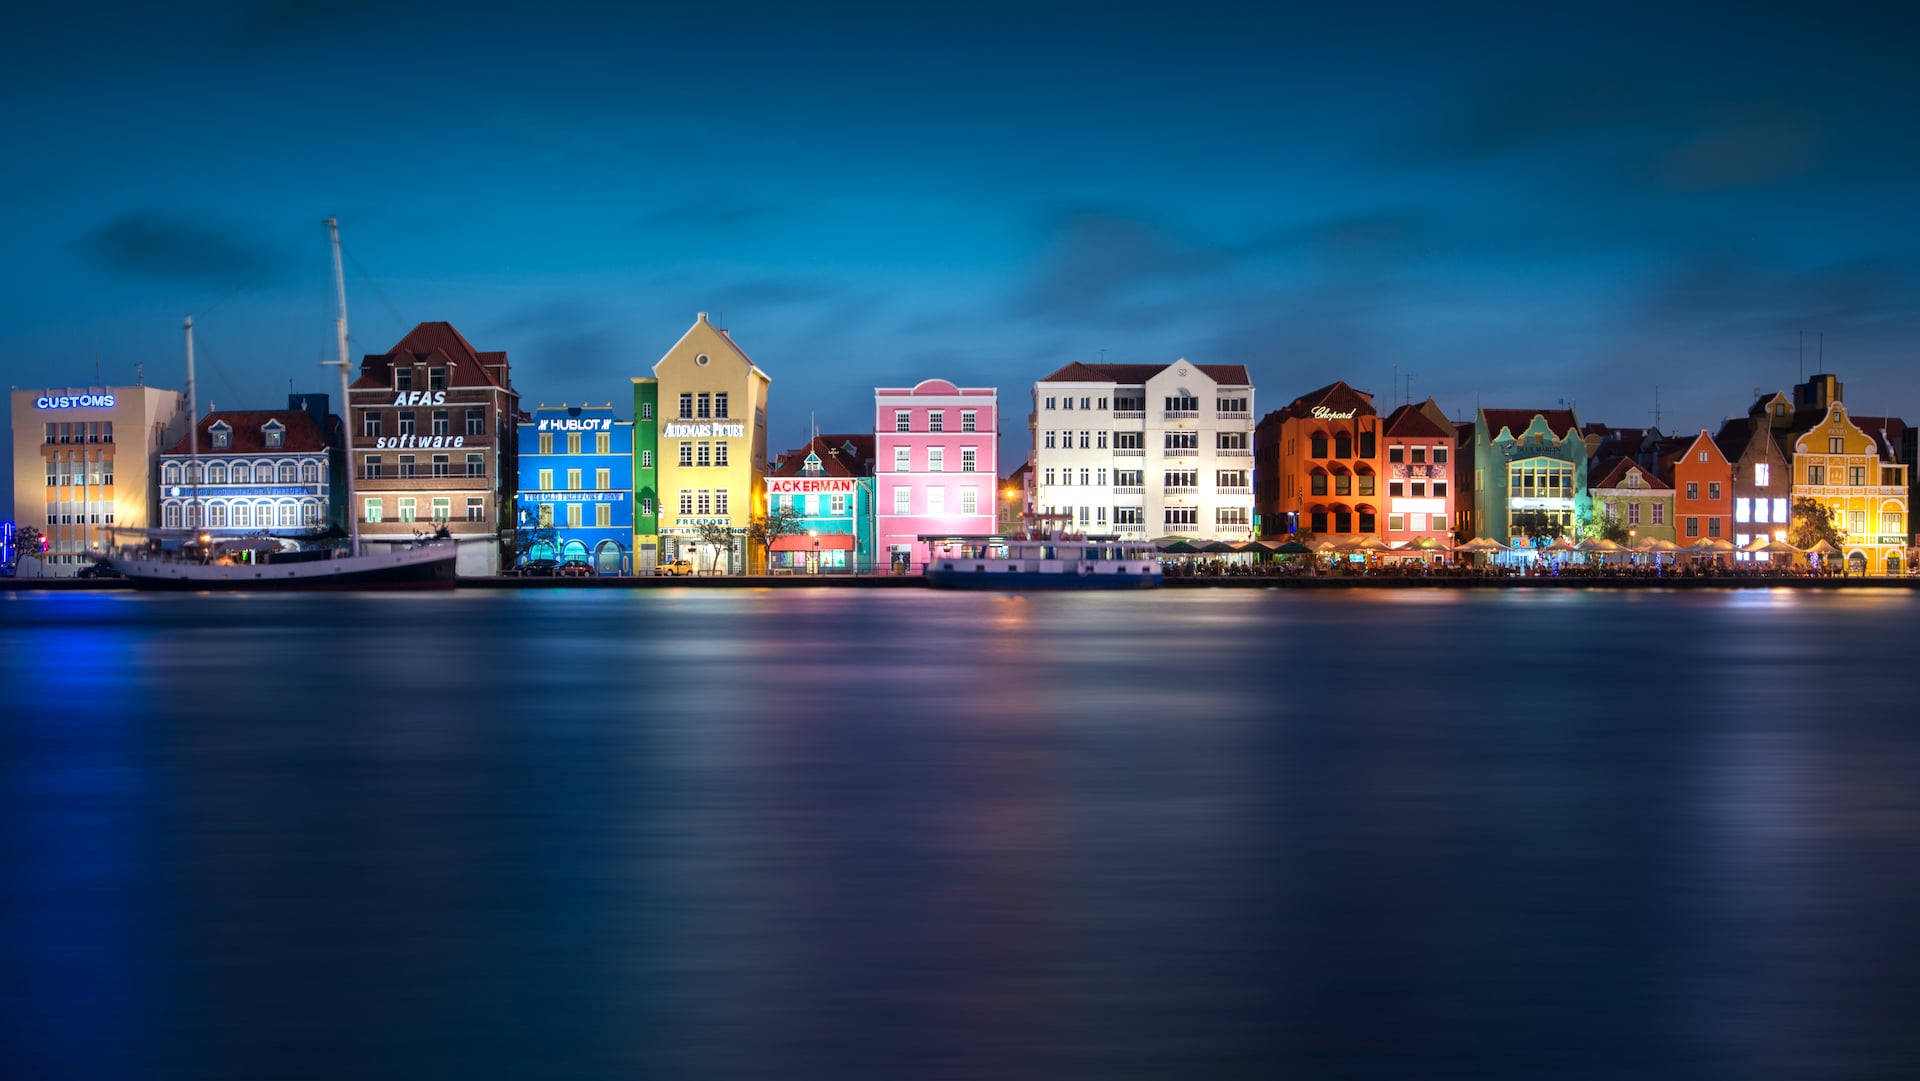 willemstaad curacao at night